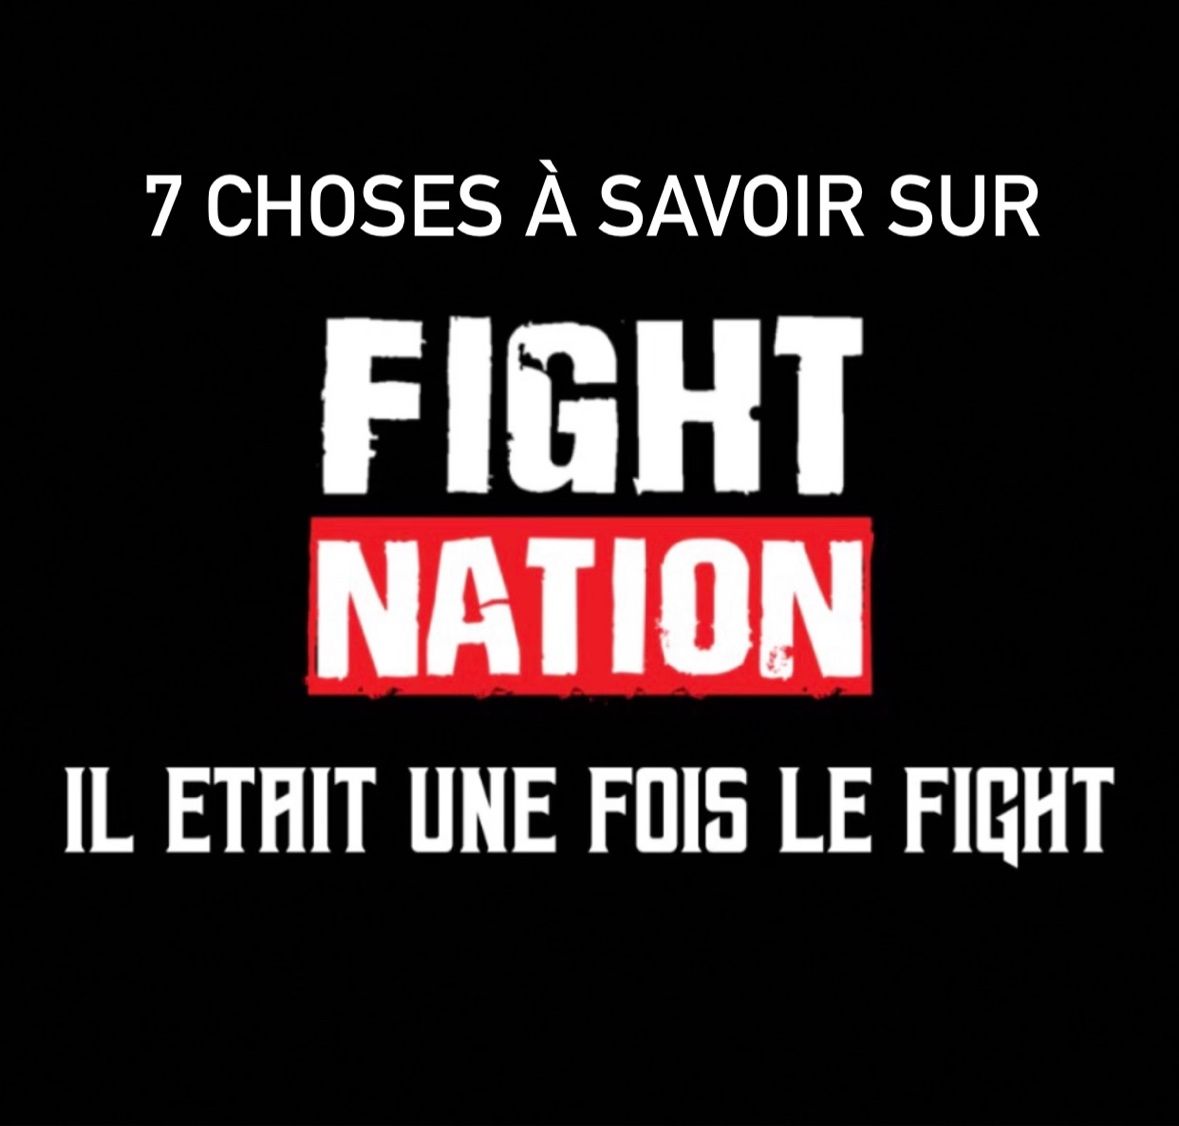 FIGHT NATION